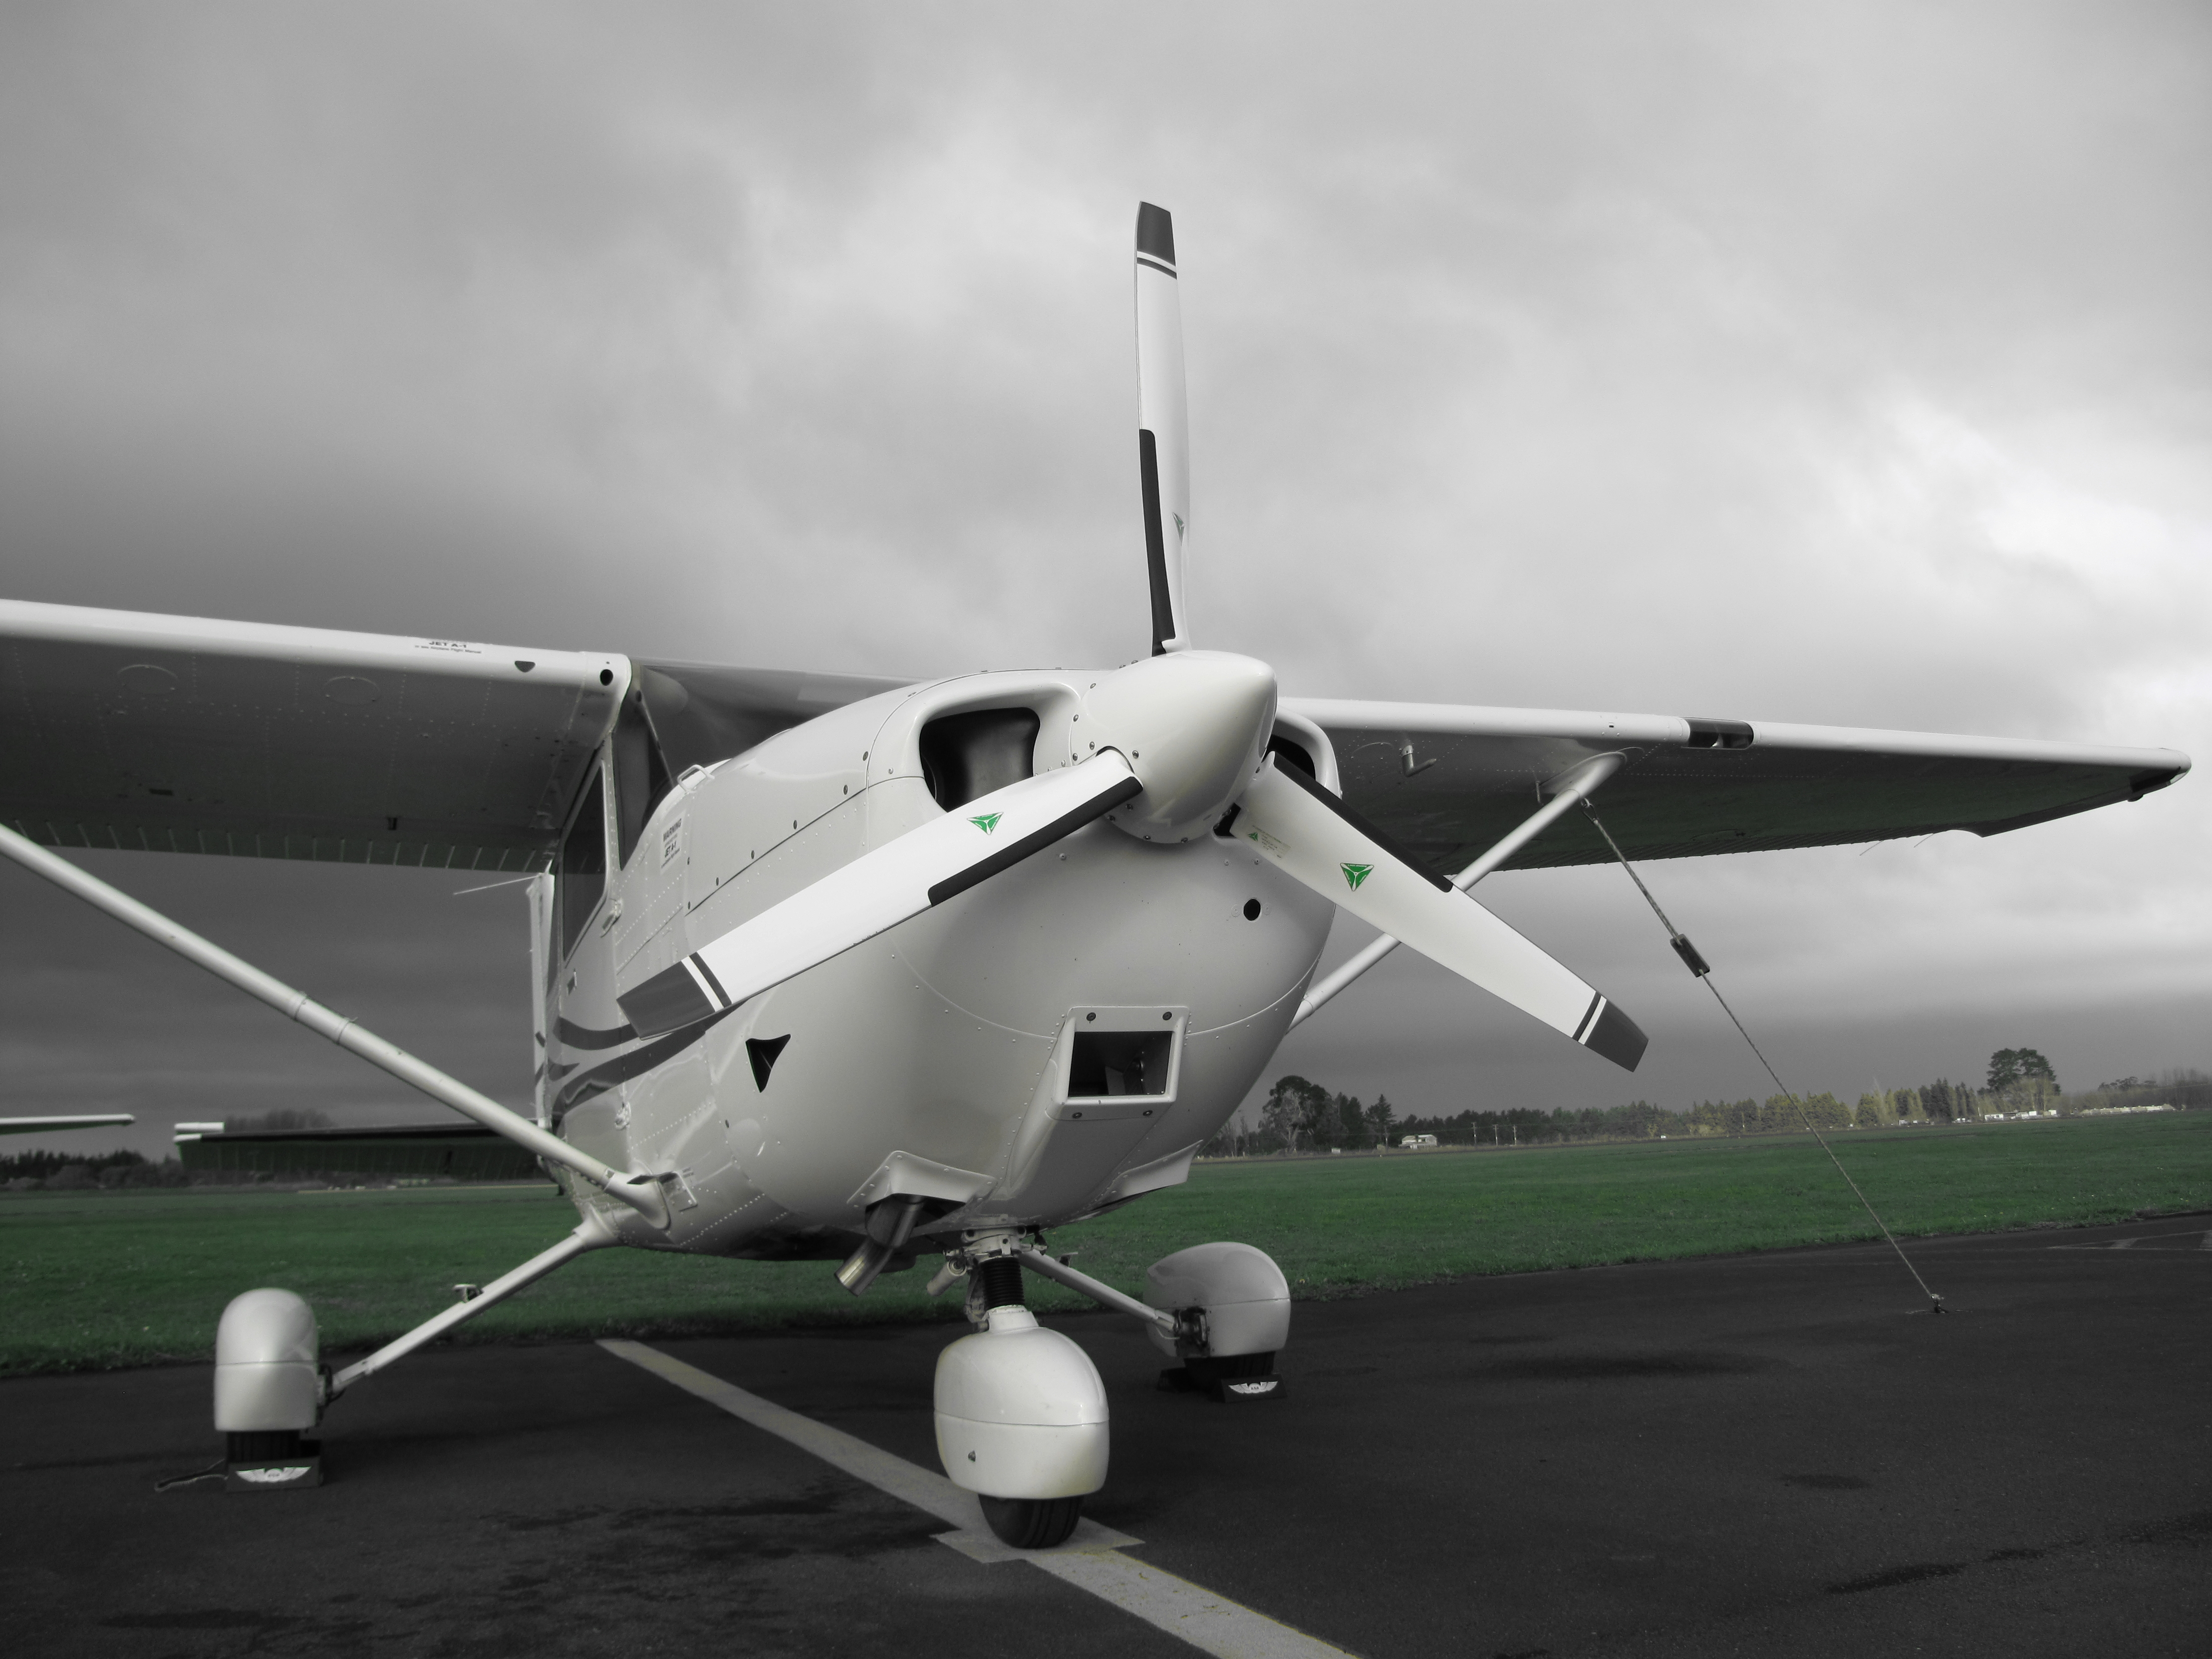 Fixed wing aircraft on airstrip on cloudy day